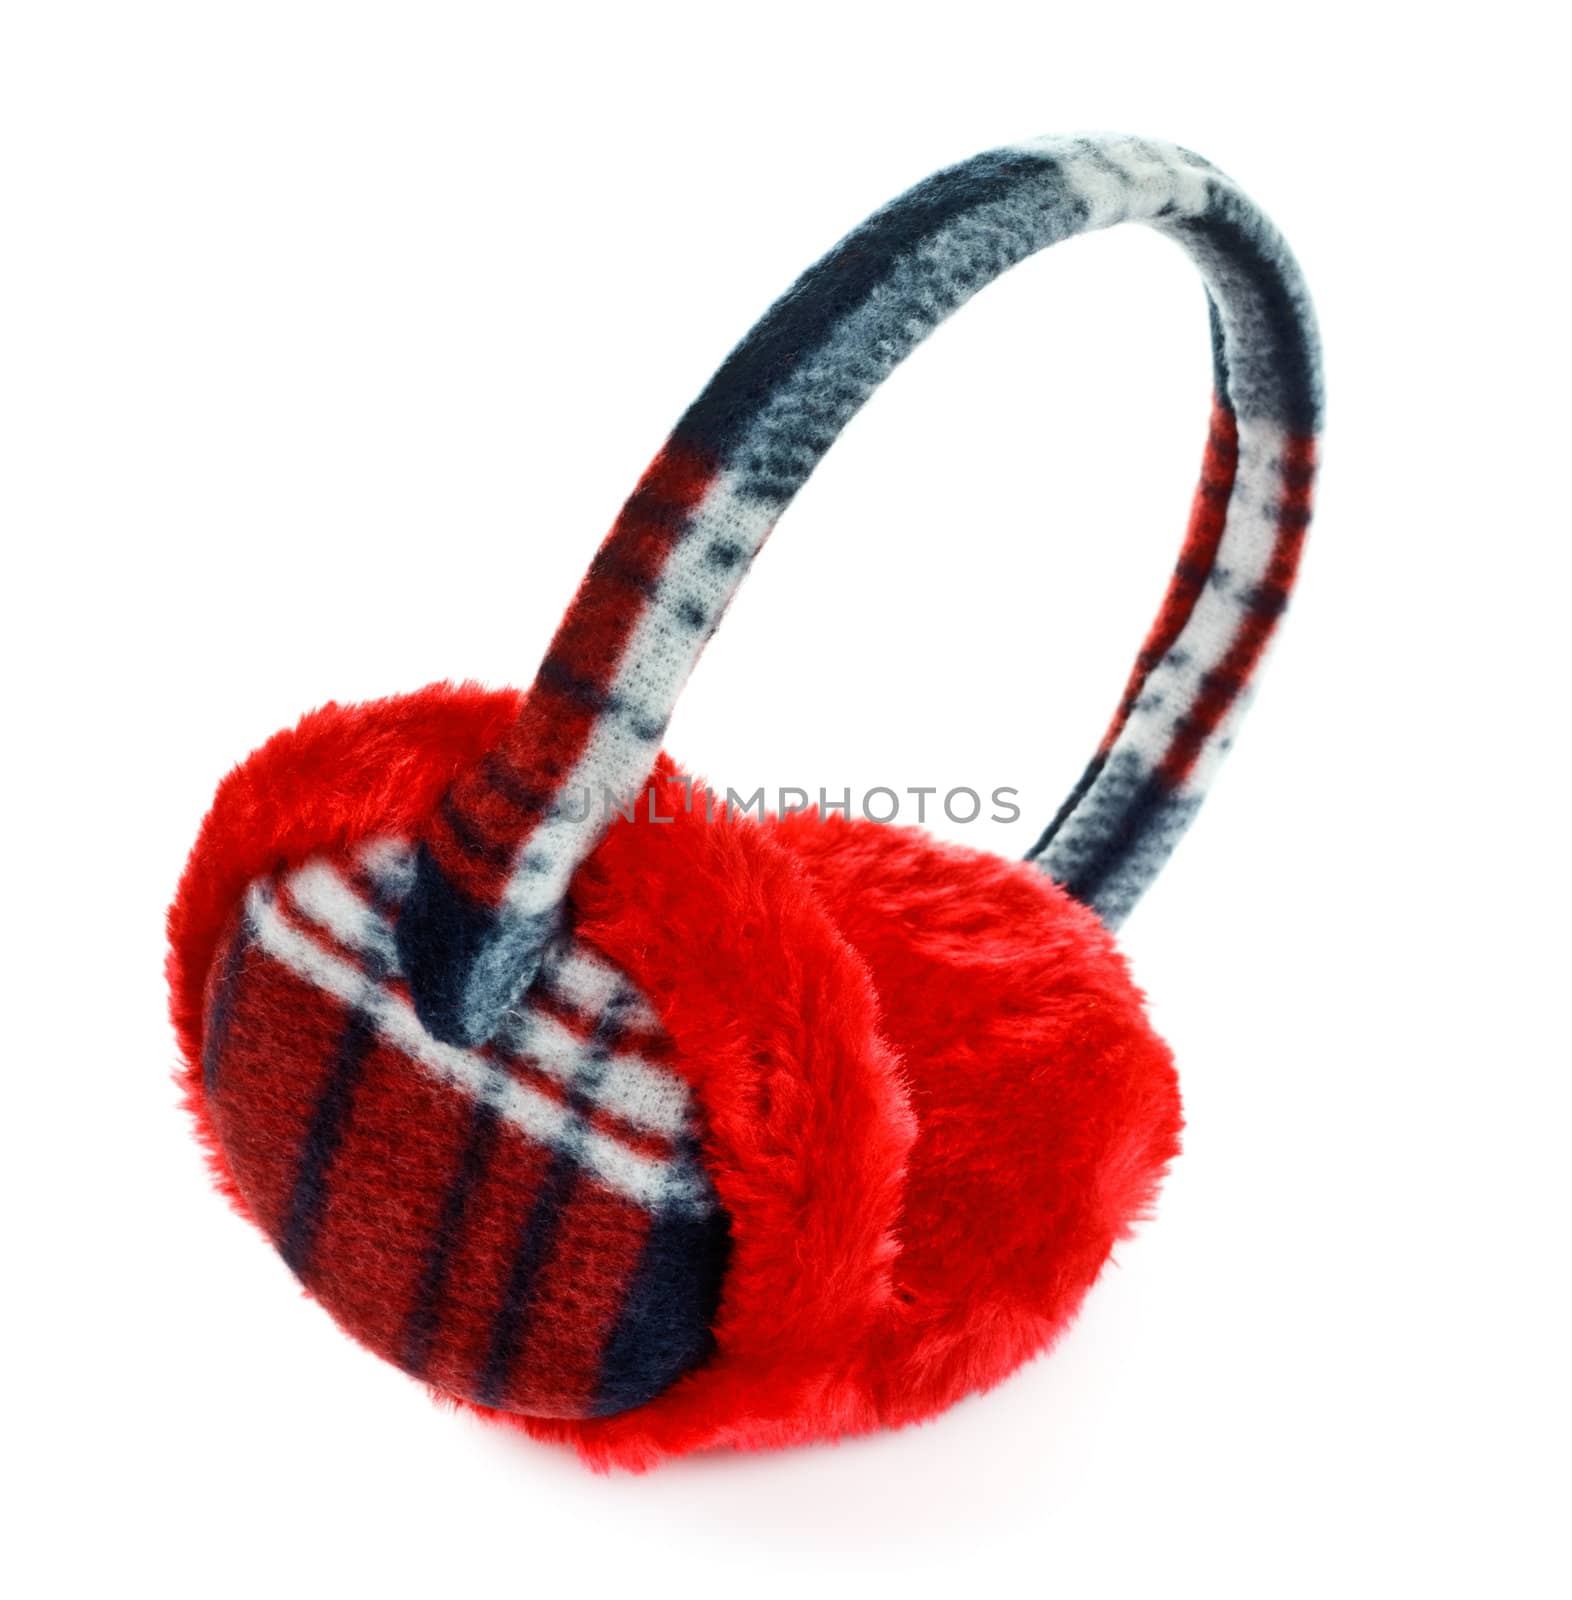 red winter earmuff isolated on white background